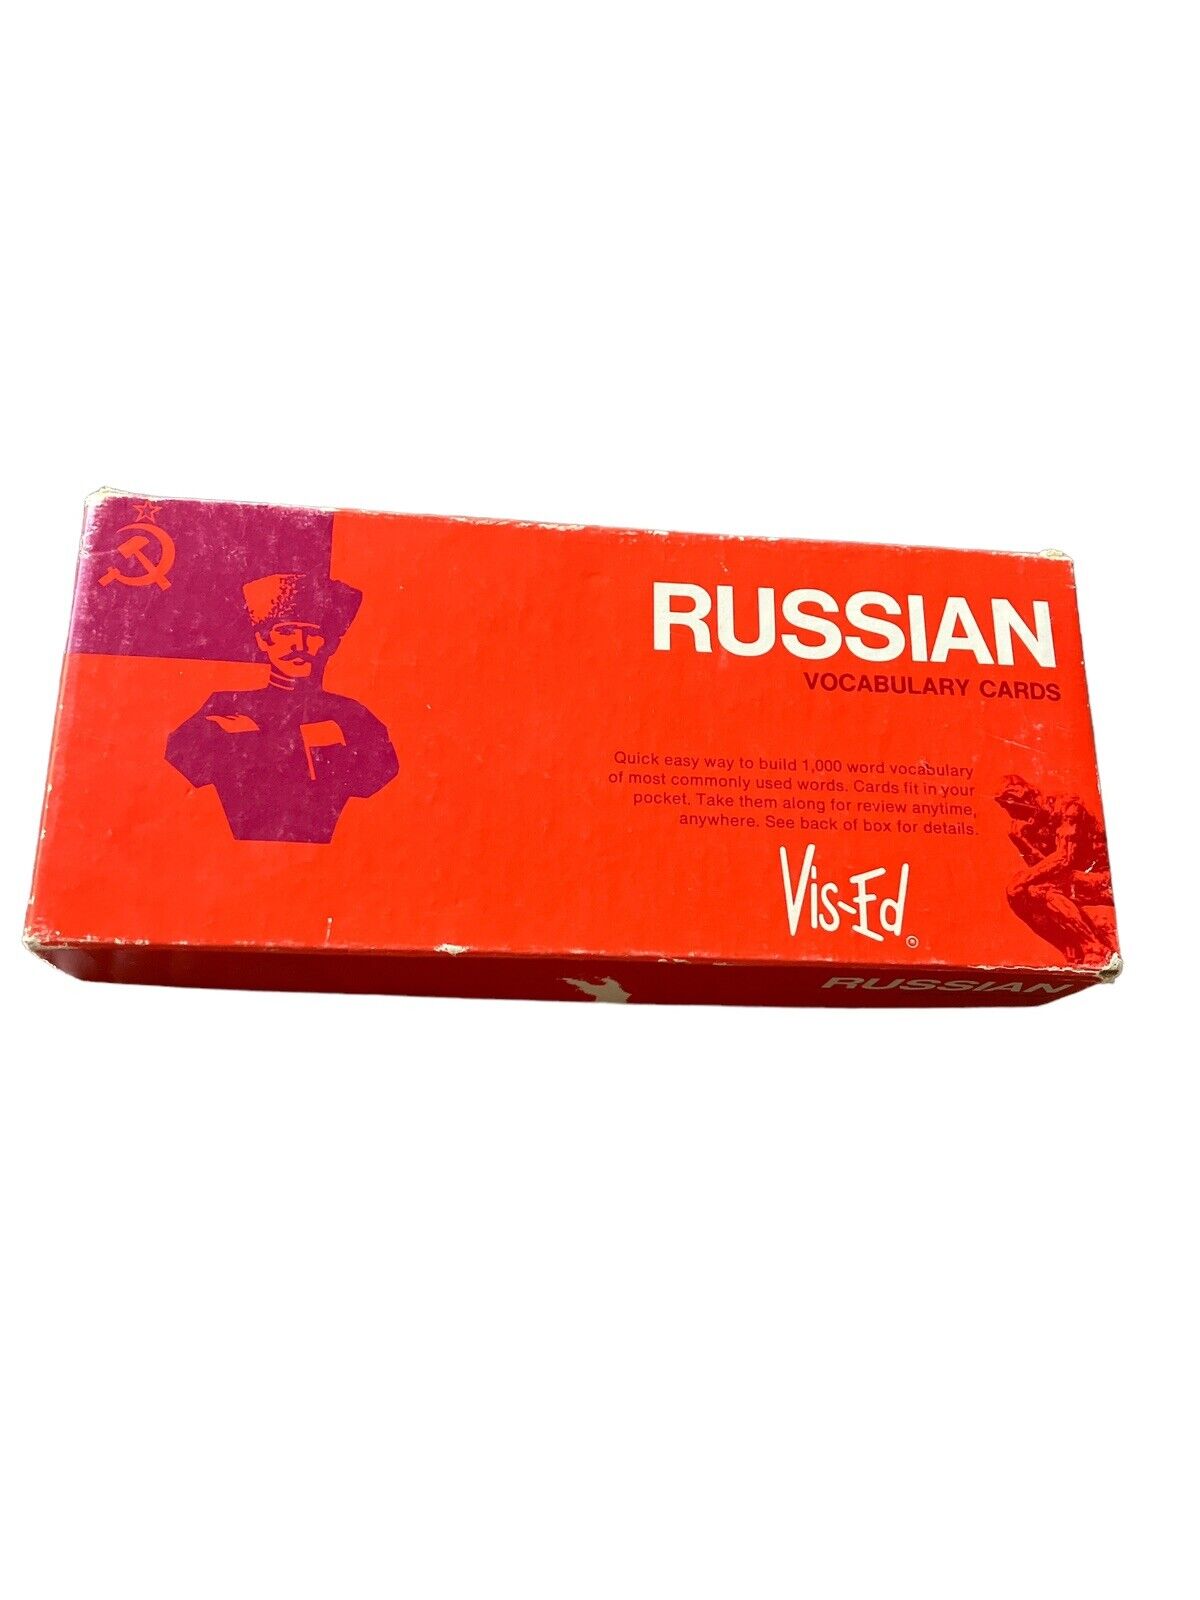 Vis-Ed Russian Vocabulary Cards - 1000 Flash Cards - Vintage